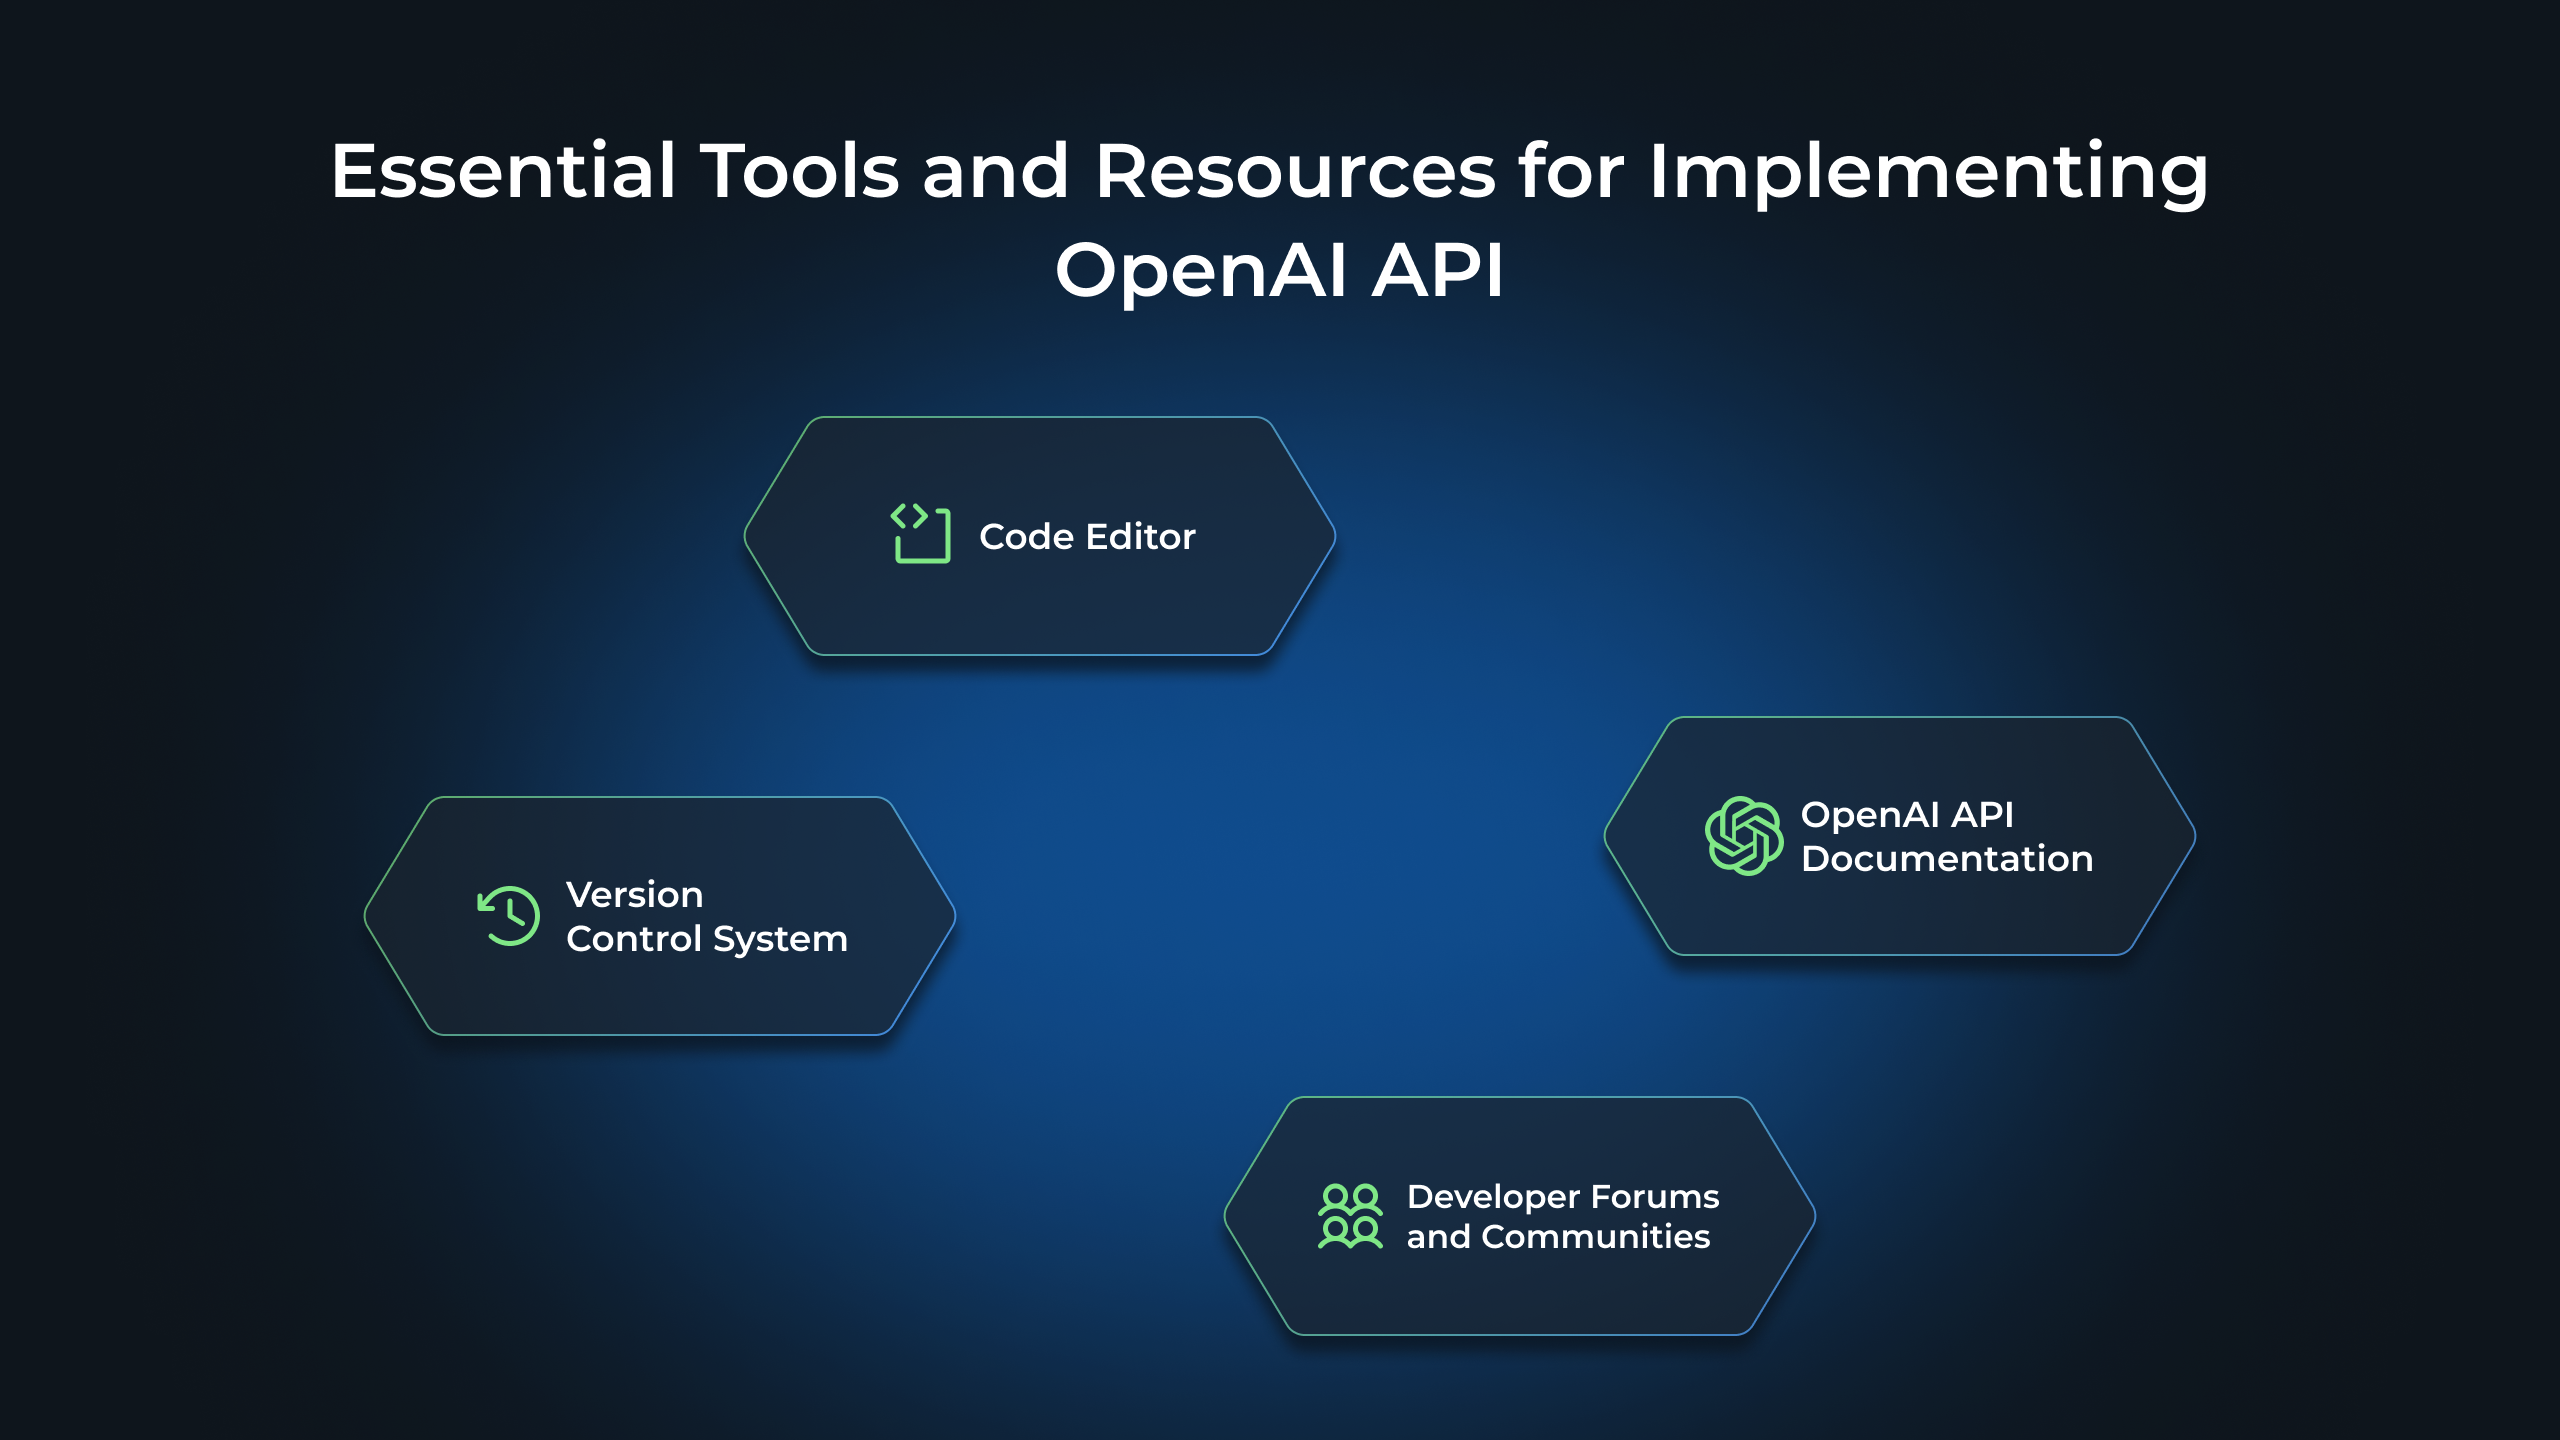 Essential Tools and Resources for Implementing OpenAI API: Code Editor, Version Control System, OpenAI API Documentation, Developer Forums and Communities
